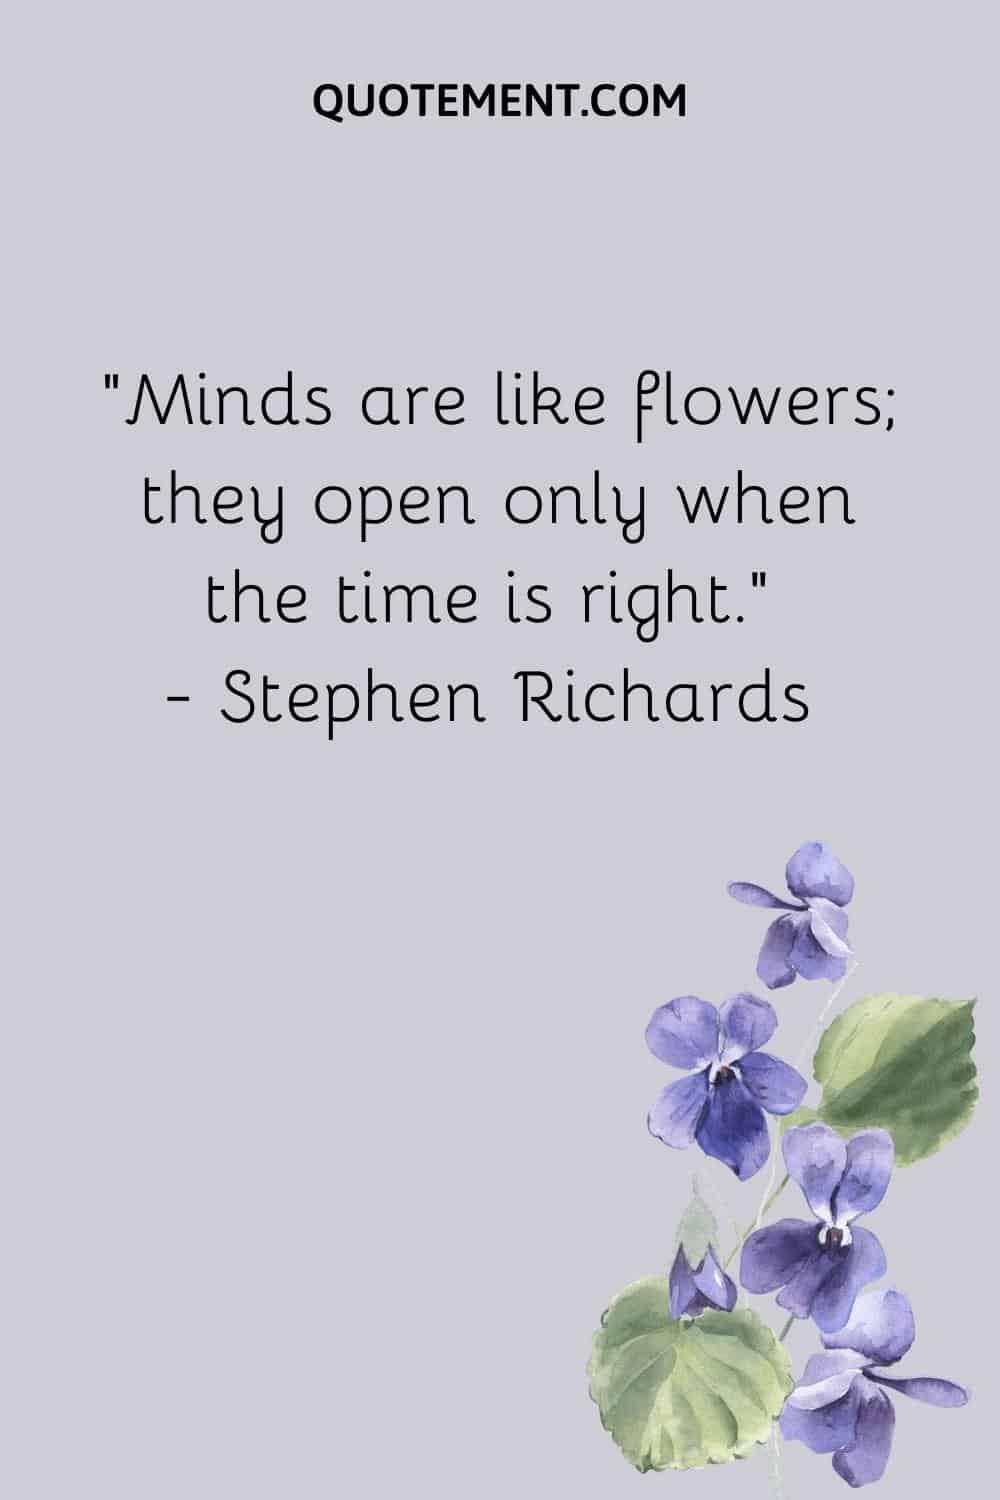 “Minds are like flowers; they open only when the time is right.” — Stephen Richards